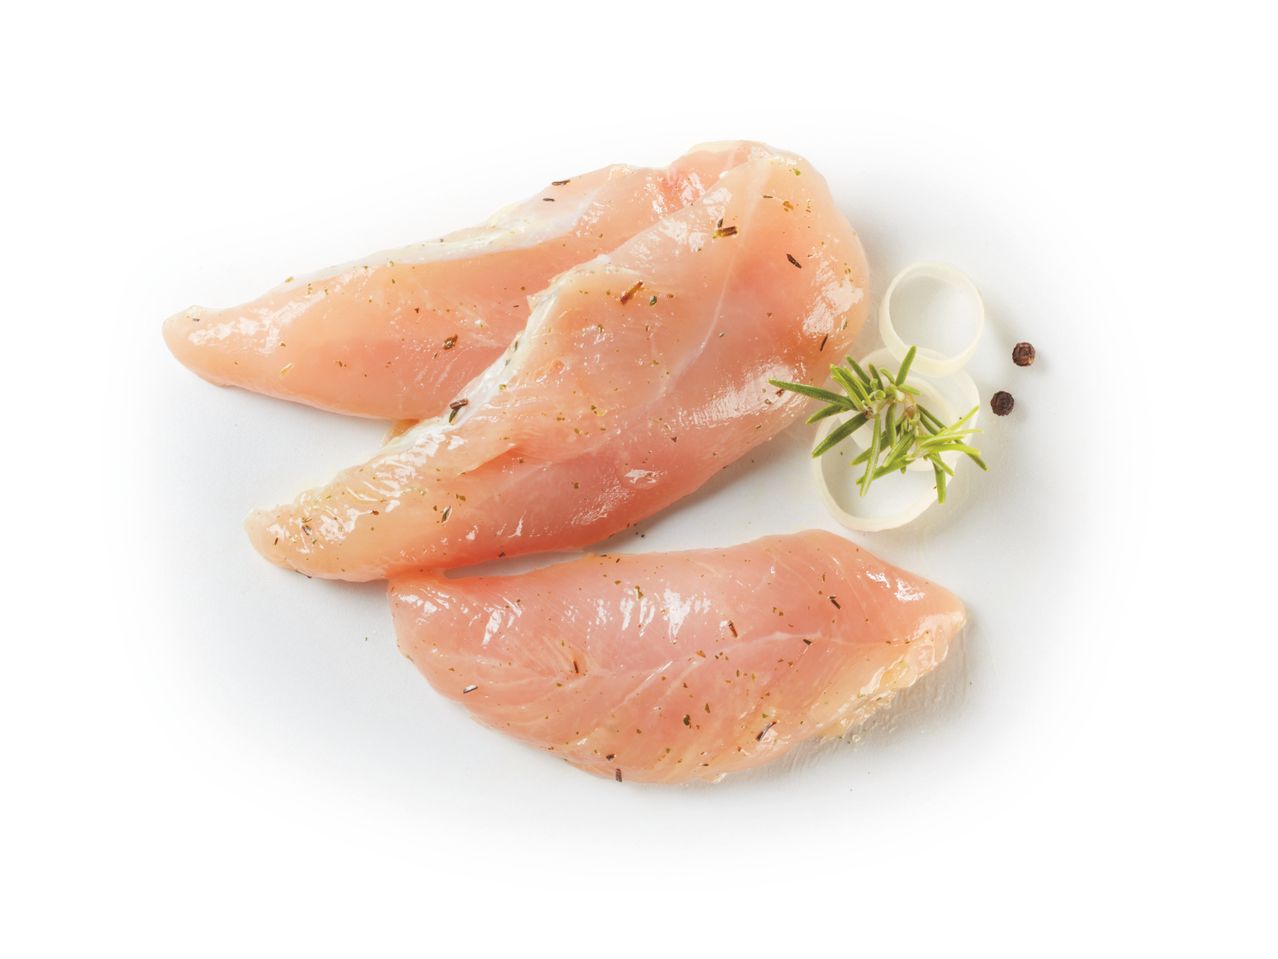 Go to full screen view: Marinated Chicken Strip Loins with Rosemary - Image 1